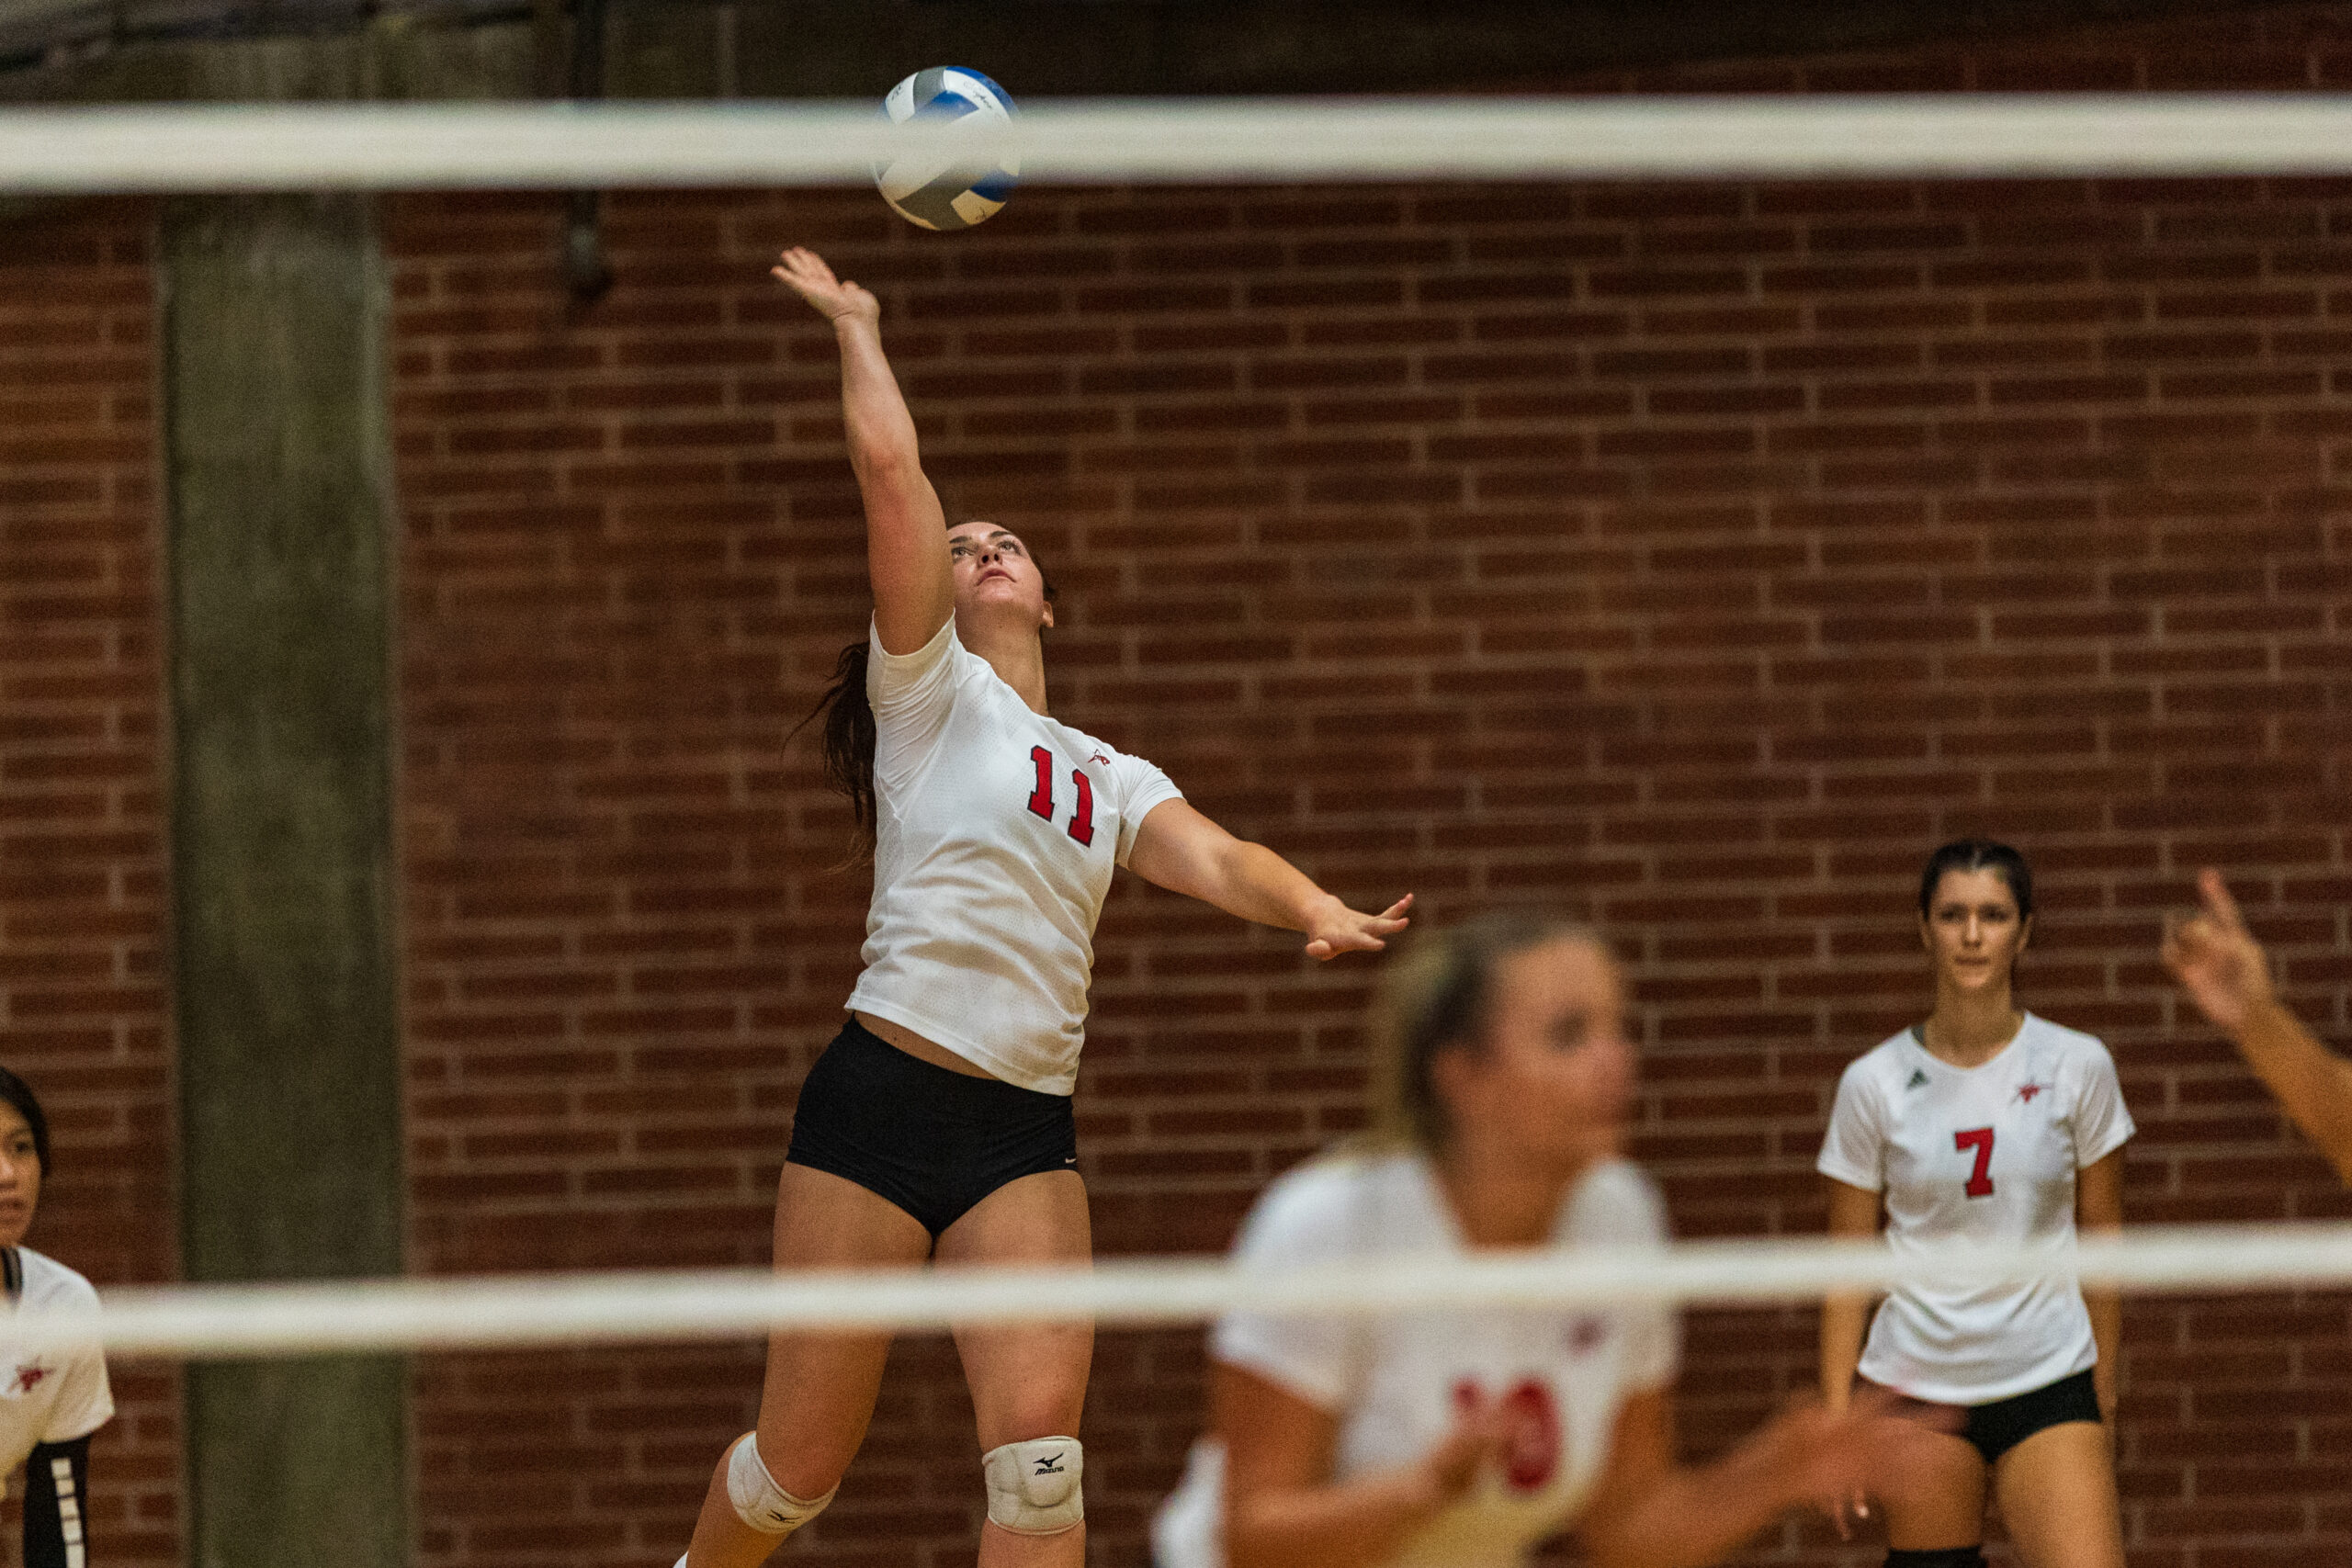 A female Palomar volleyball player (11) serves a volleyball with her right hand.